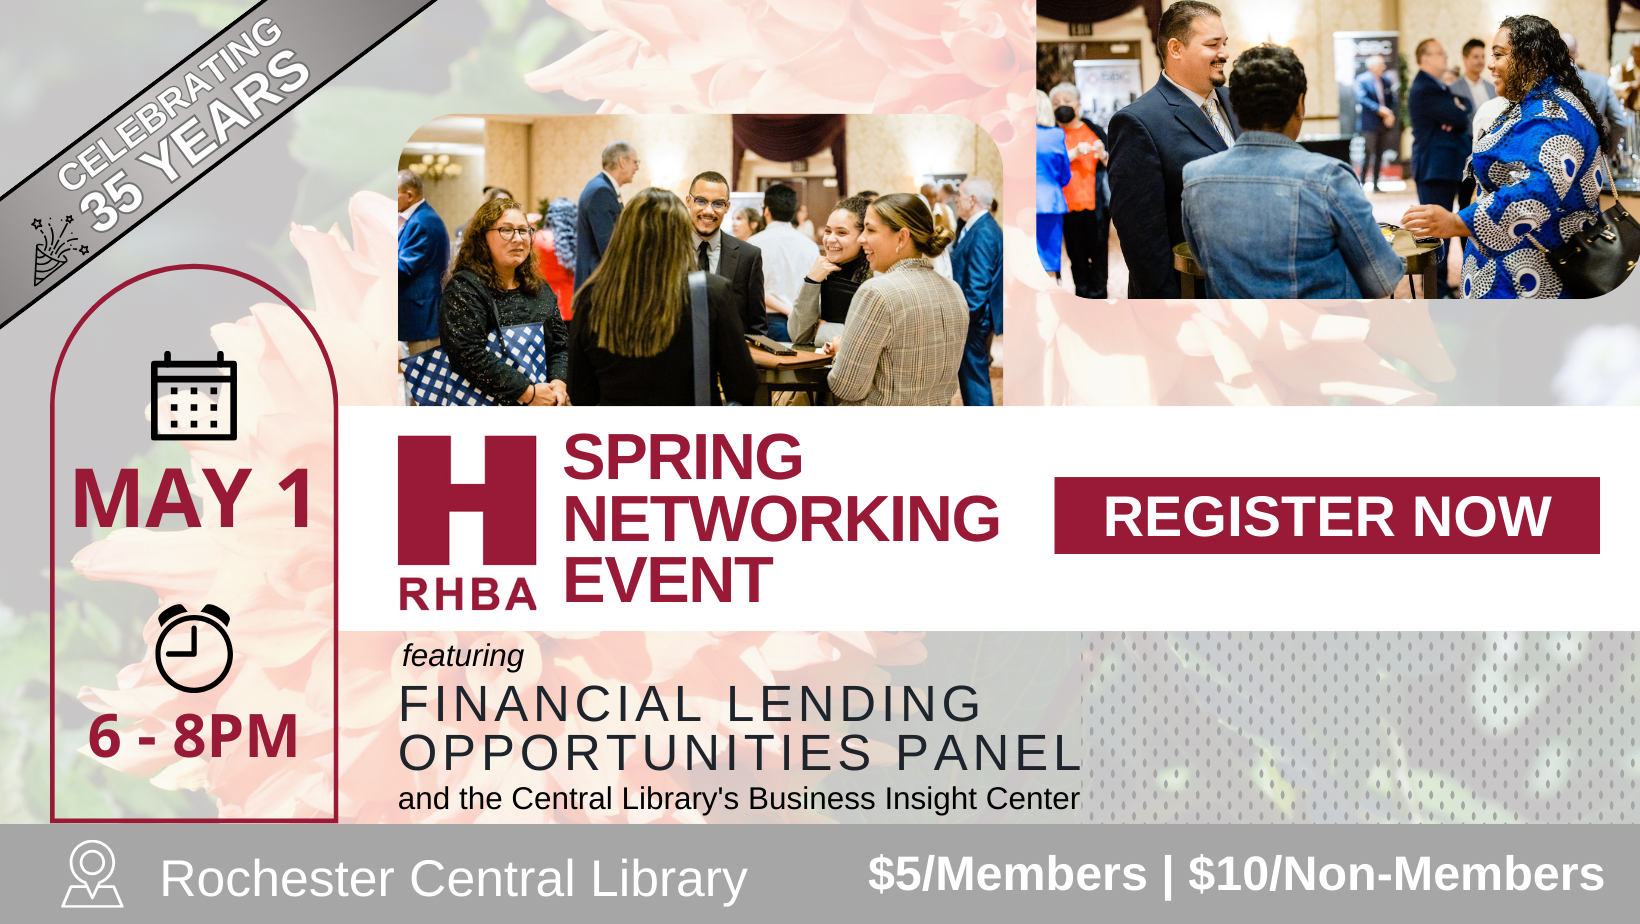 Register now for RHBA's Spring Netowrking Event at the Rochester Central Library on May 1, 6-8pm